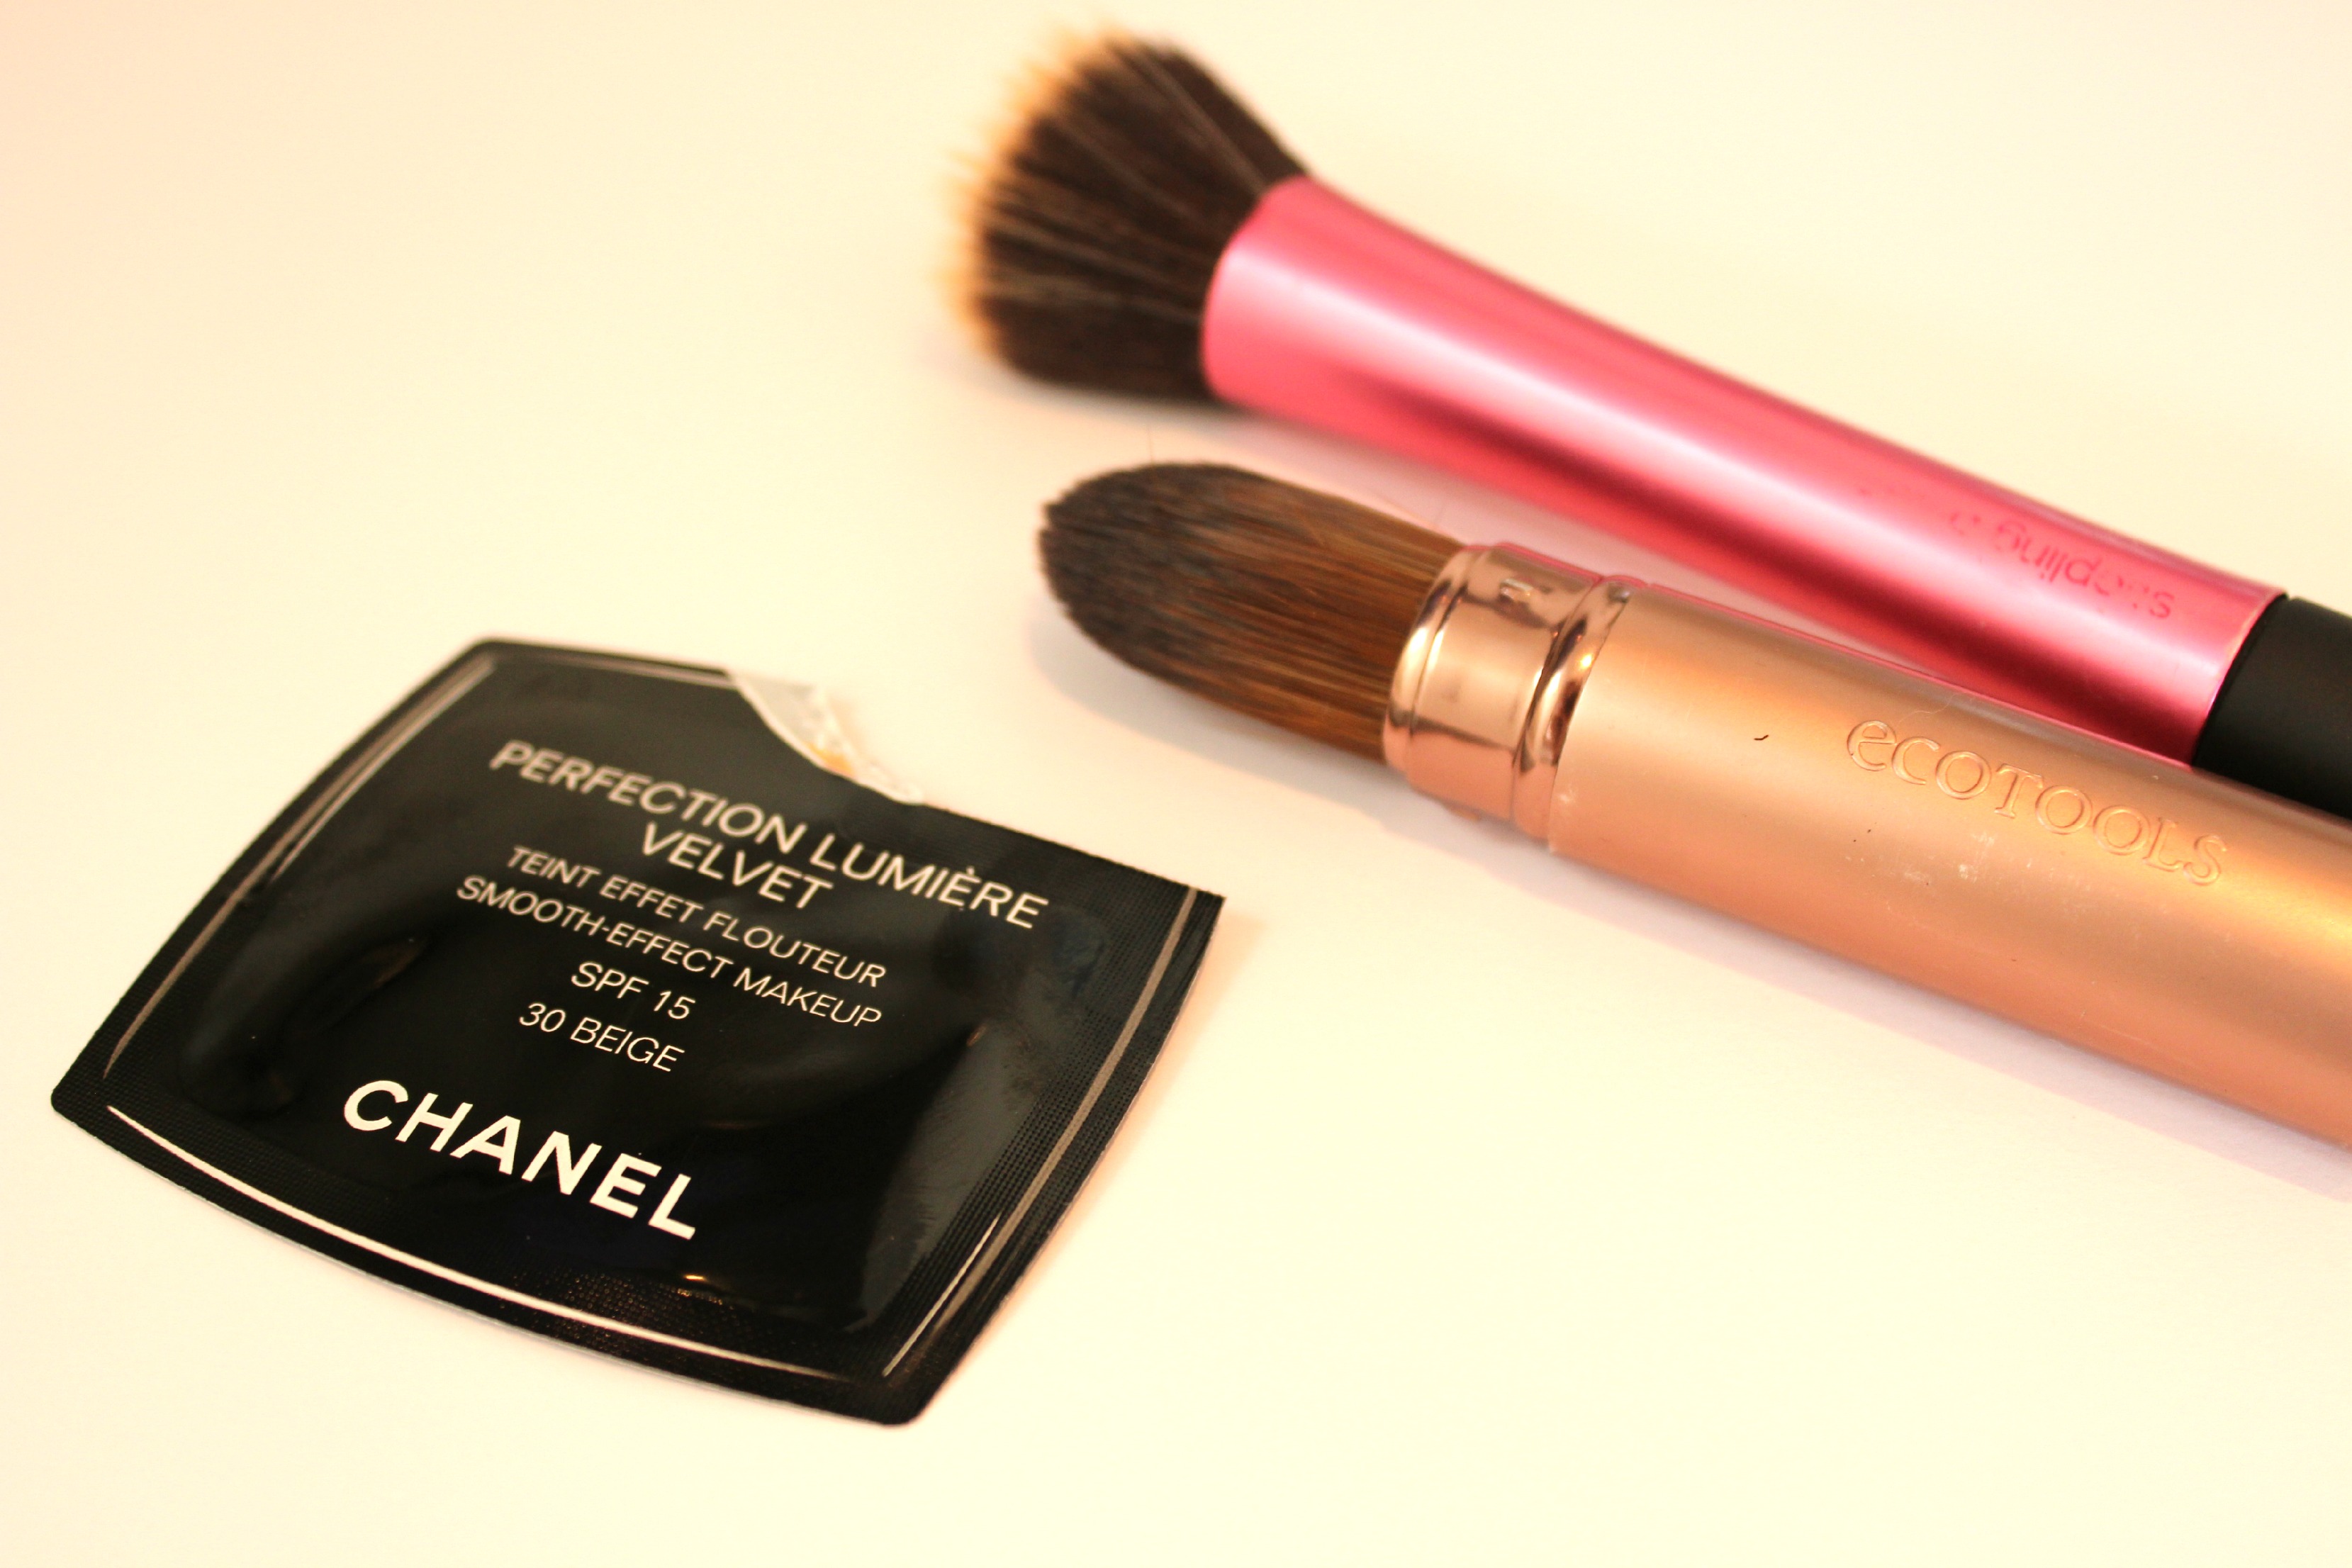 Chanel – The new foundation 'Perfection Lumiere Velvet